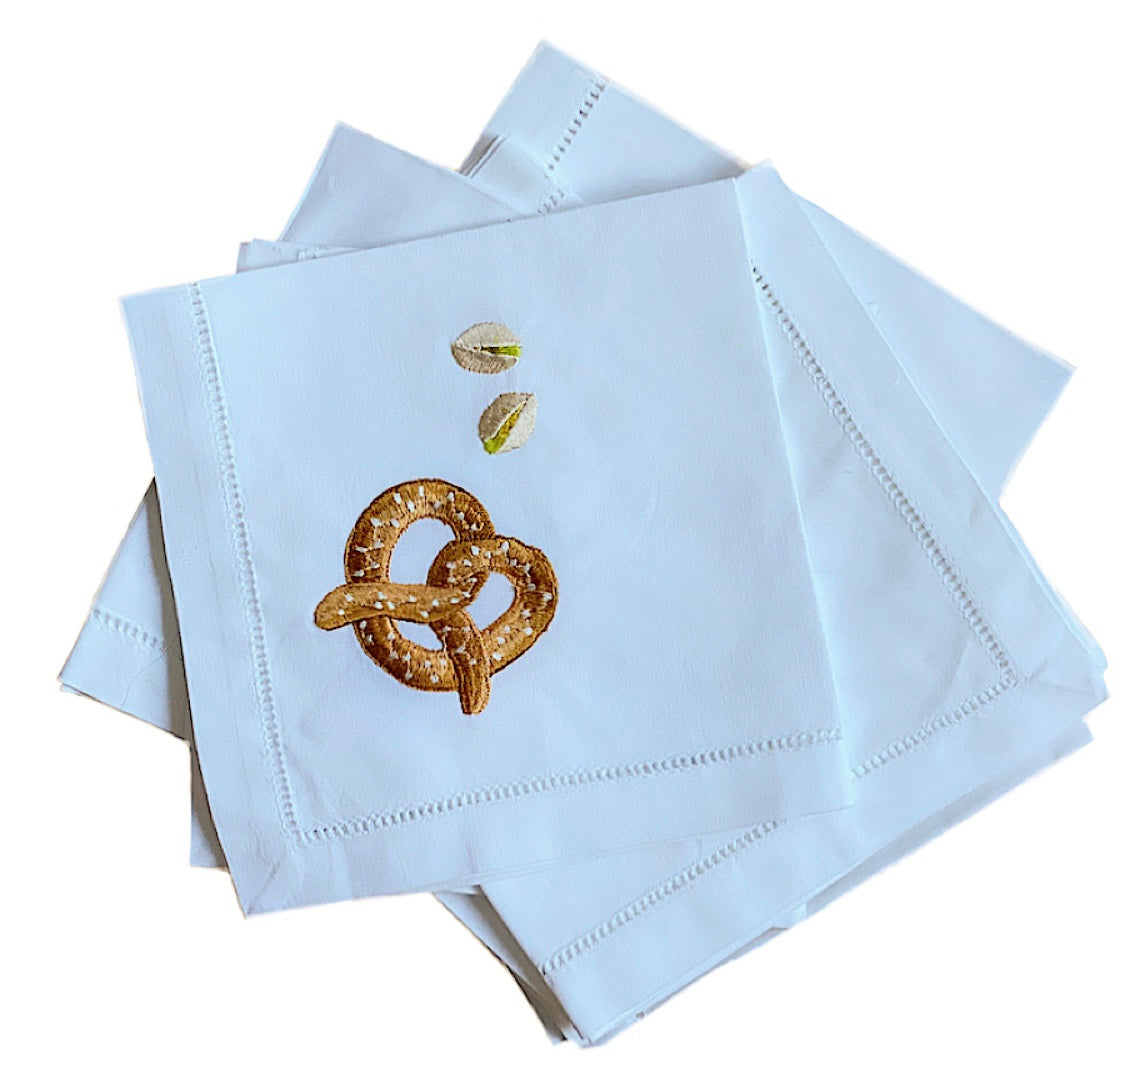 Pile of white napkins. Top napkin features embroidered pretzel and two embroidered pistachios